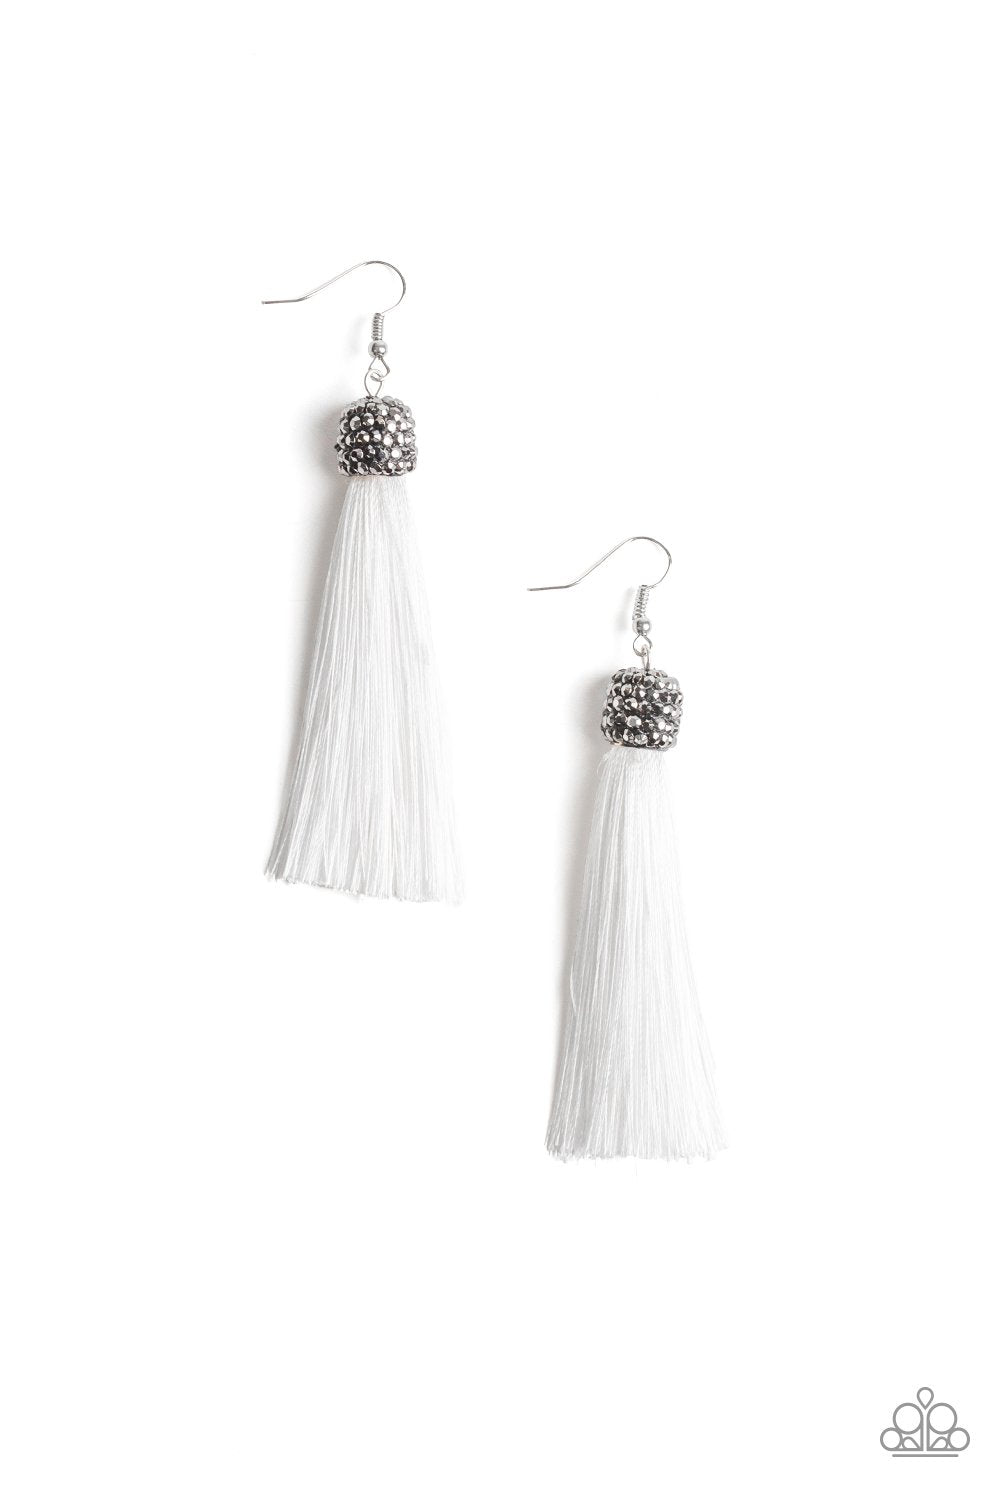 Make Room For Plume White Tassel Earrings - Paparazzi Accessories-CarasShop.com - $5 Jewelry by Cara Jewels